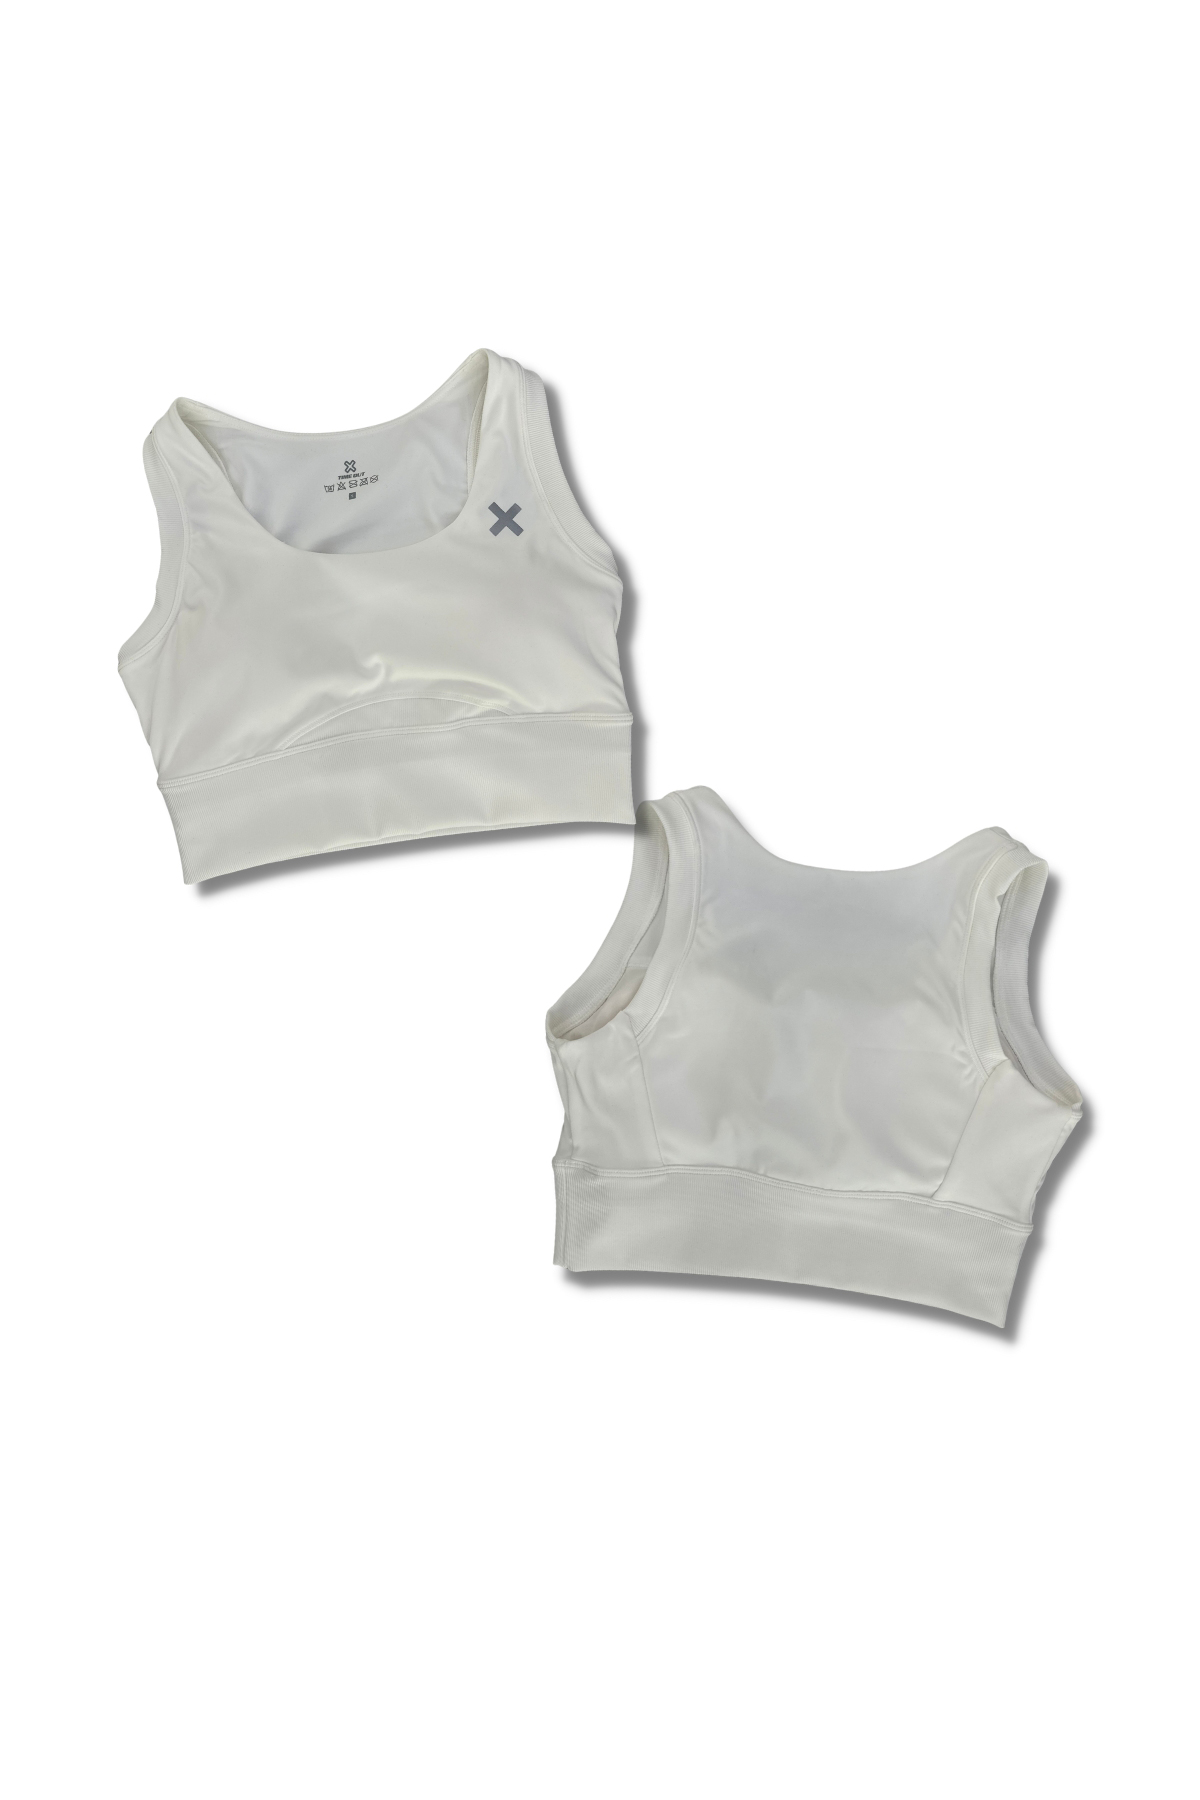 Essential-Sports-Bra-and-Sweatpants-Set-white-front-back